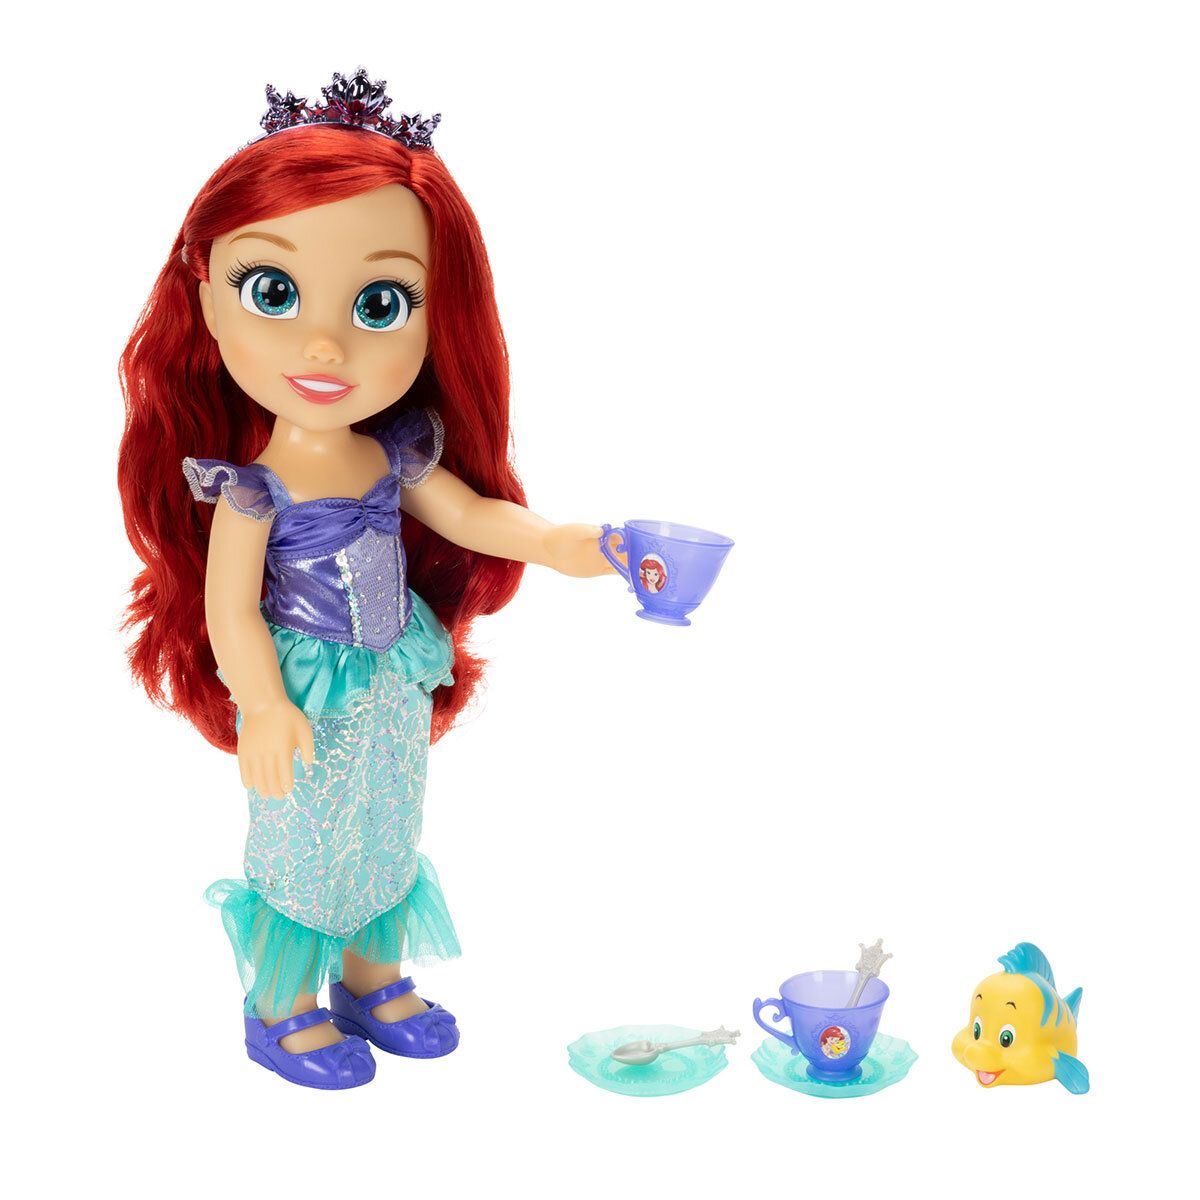 Buy Disney Tea Time Party Doll Ariel & Flounder Box Image at Costco.co.uk